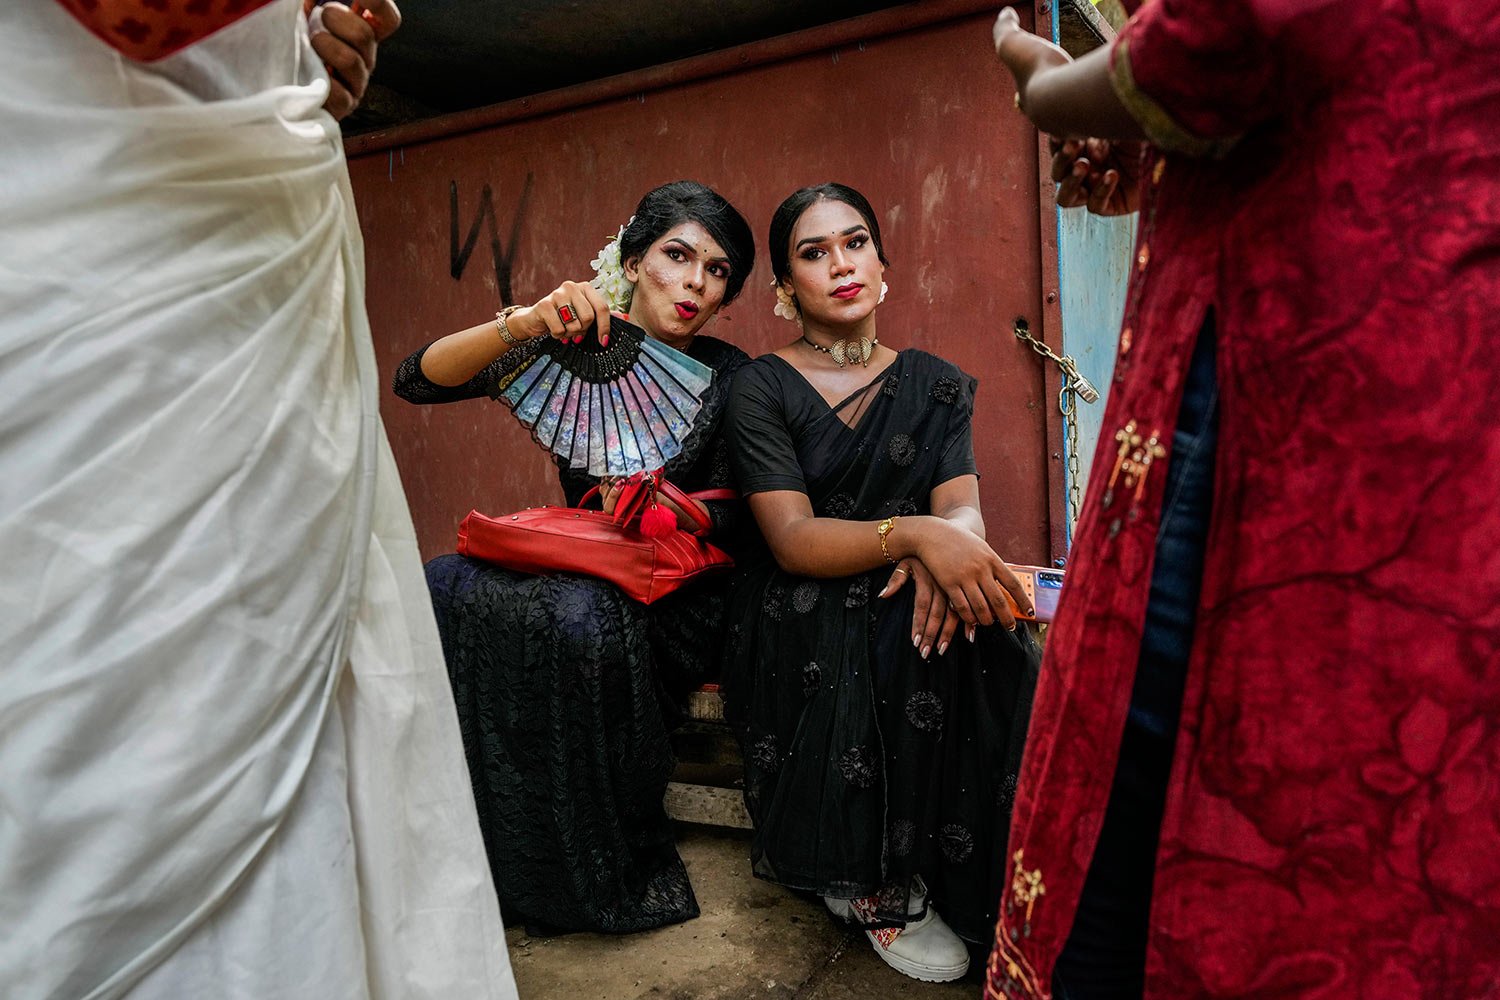  Activists and members of the LGBTQ community wait to take part in a Pride Parade in Kolkata, India, Sunday, June 19, 2022. (AP Photo/Bikas Das) 